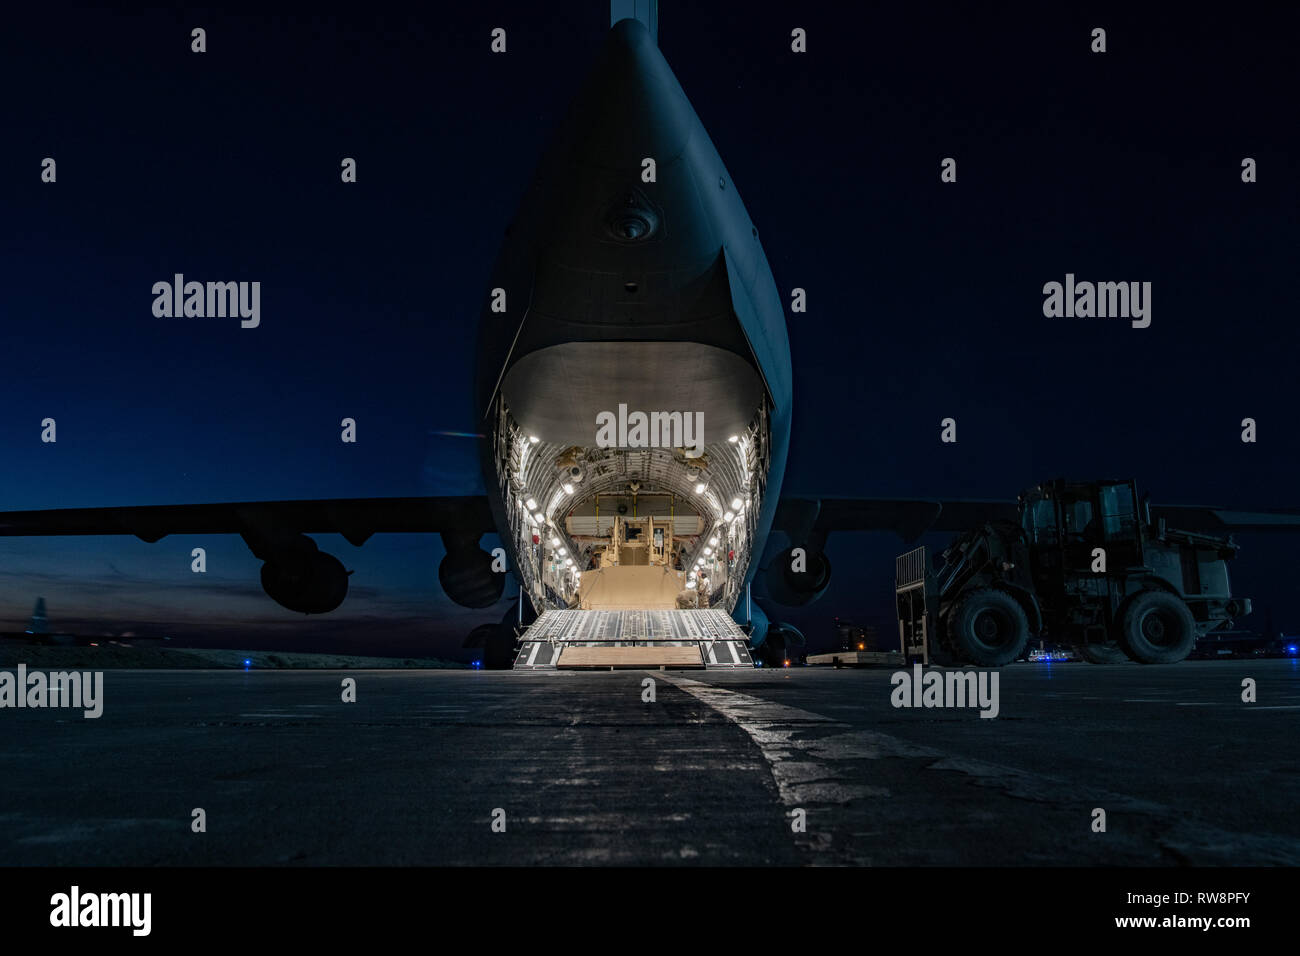 A C-17 Globemaster III loaded with a D7R-II medium bulldozer sits prepared for forward deployment at an undisclosed location in Southwest Asia, Jan. 11, 2019. The 386th Air Expeditionary Wing oversees the busiest aerial port of debarkation in the U.S. Air Forces Central Command area of responsibility in support of Operations Inherent Resolve and Freedom’s Sentinel. (U.S. Air Force Photo/Tech. Sgt. Robert Cloys) Stock Photo